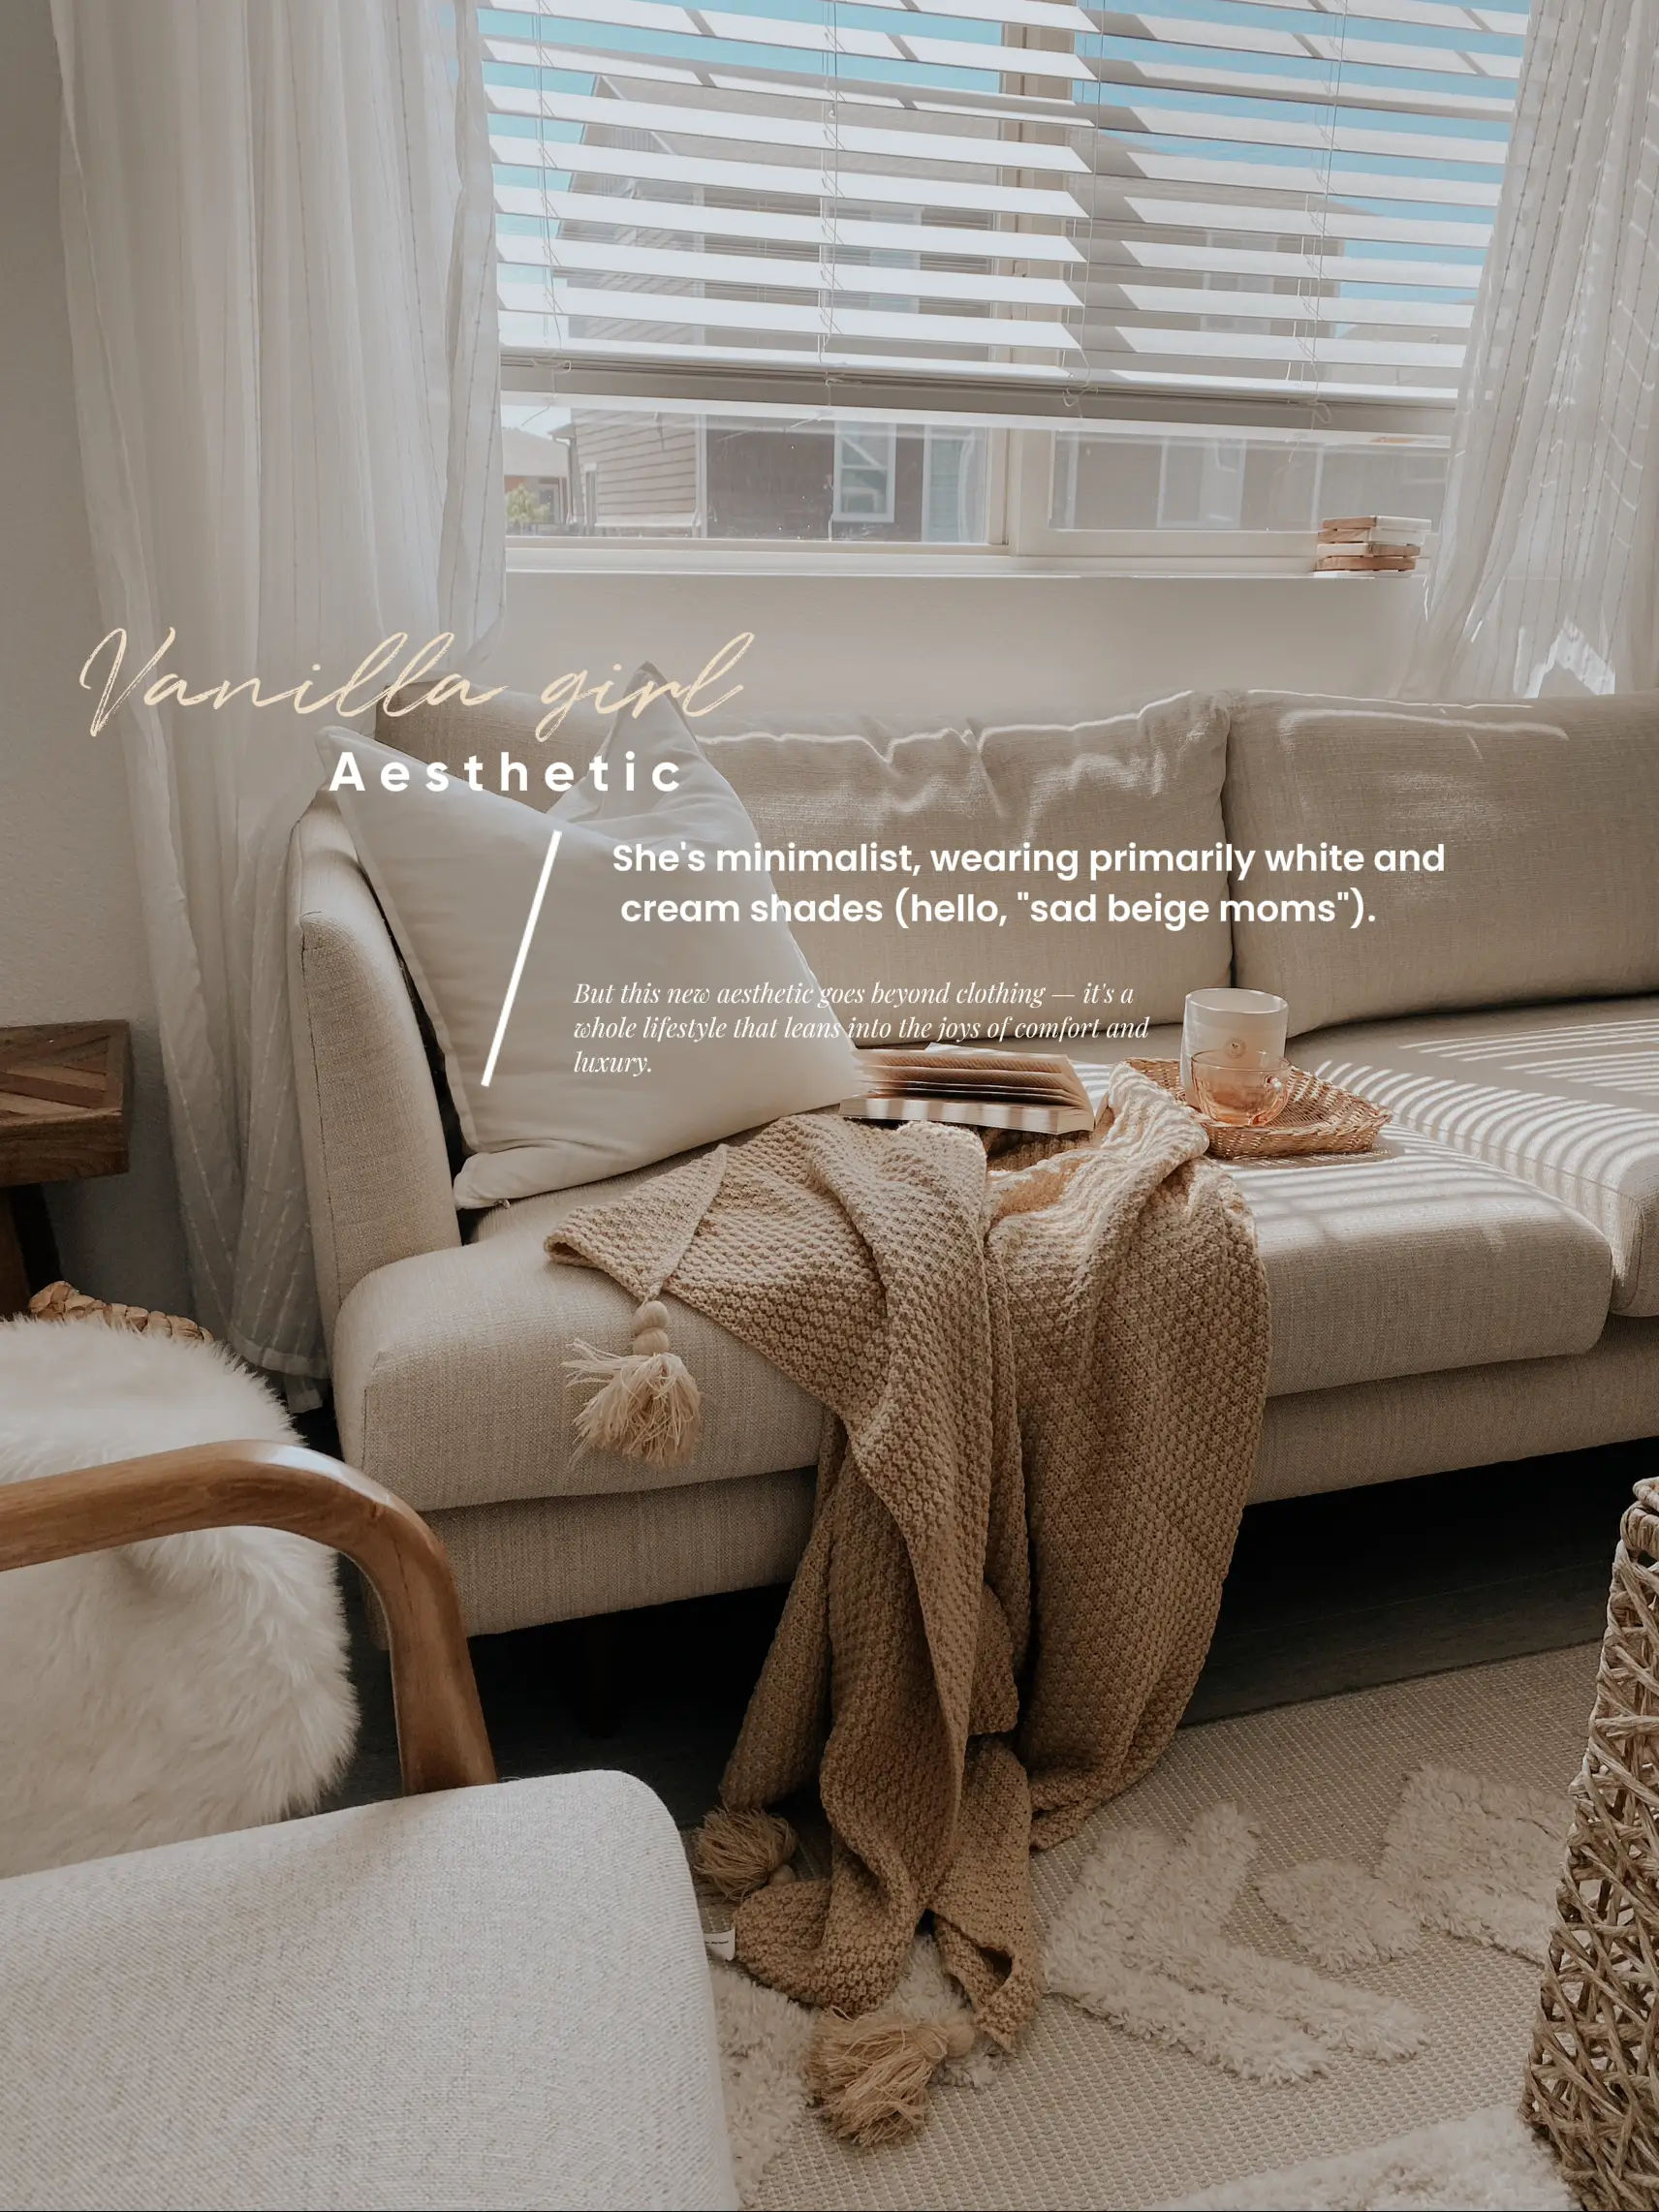 Vanilla girl home aesthetic, Gallery posted by Alllovelythings